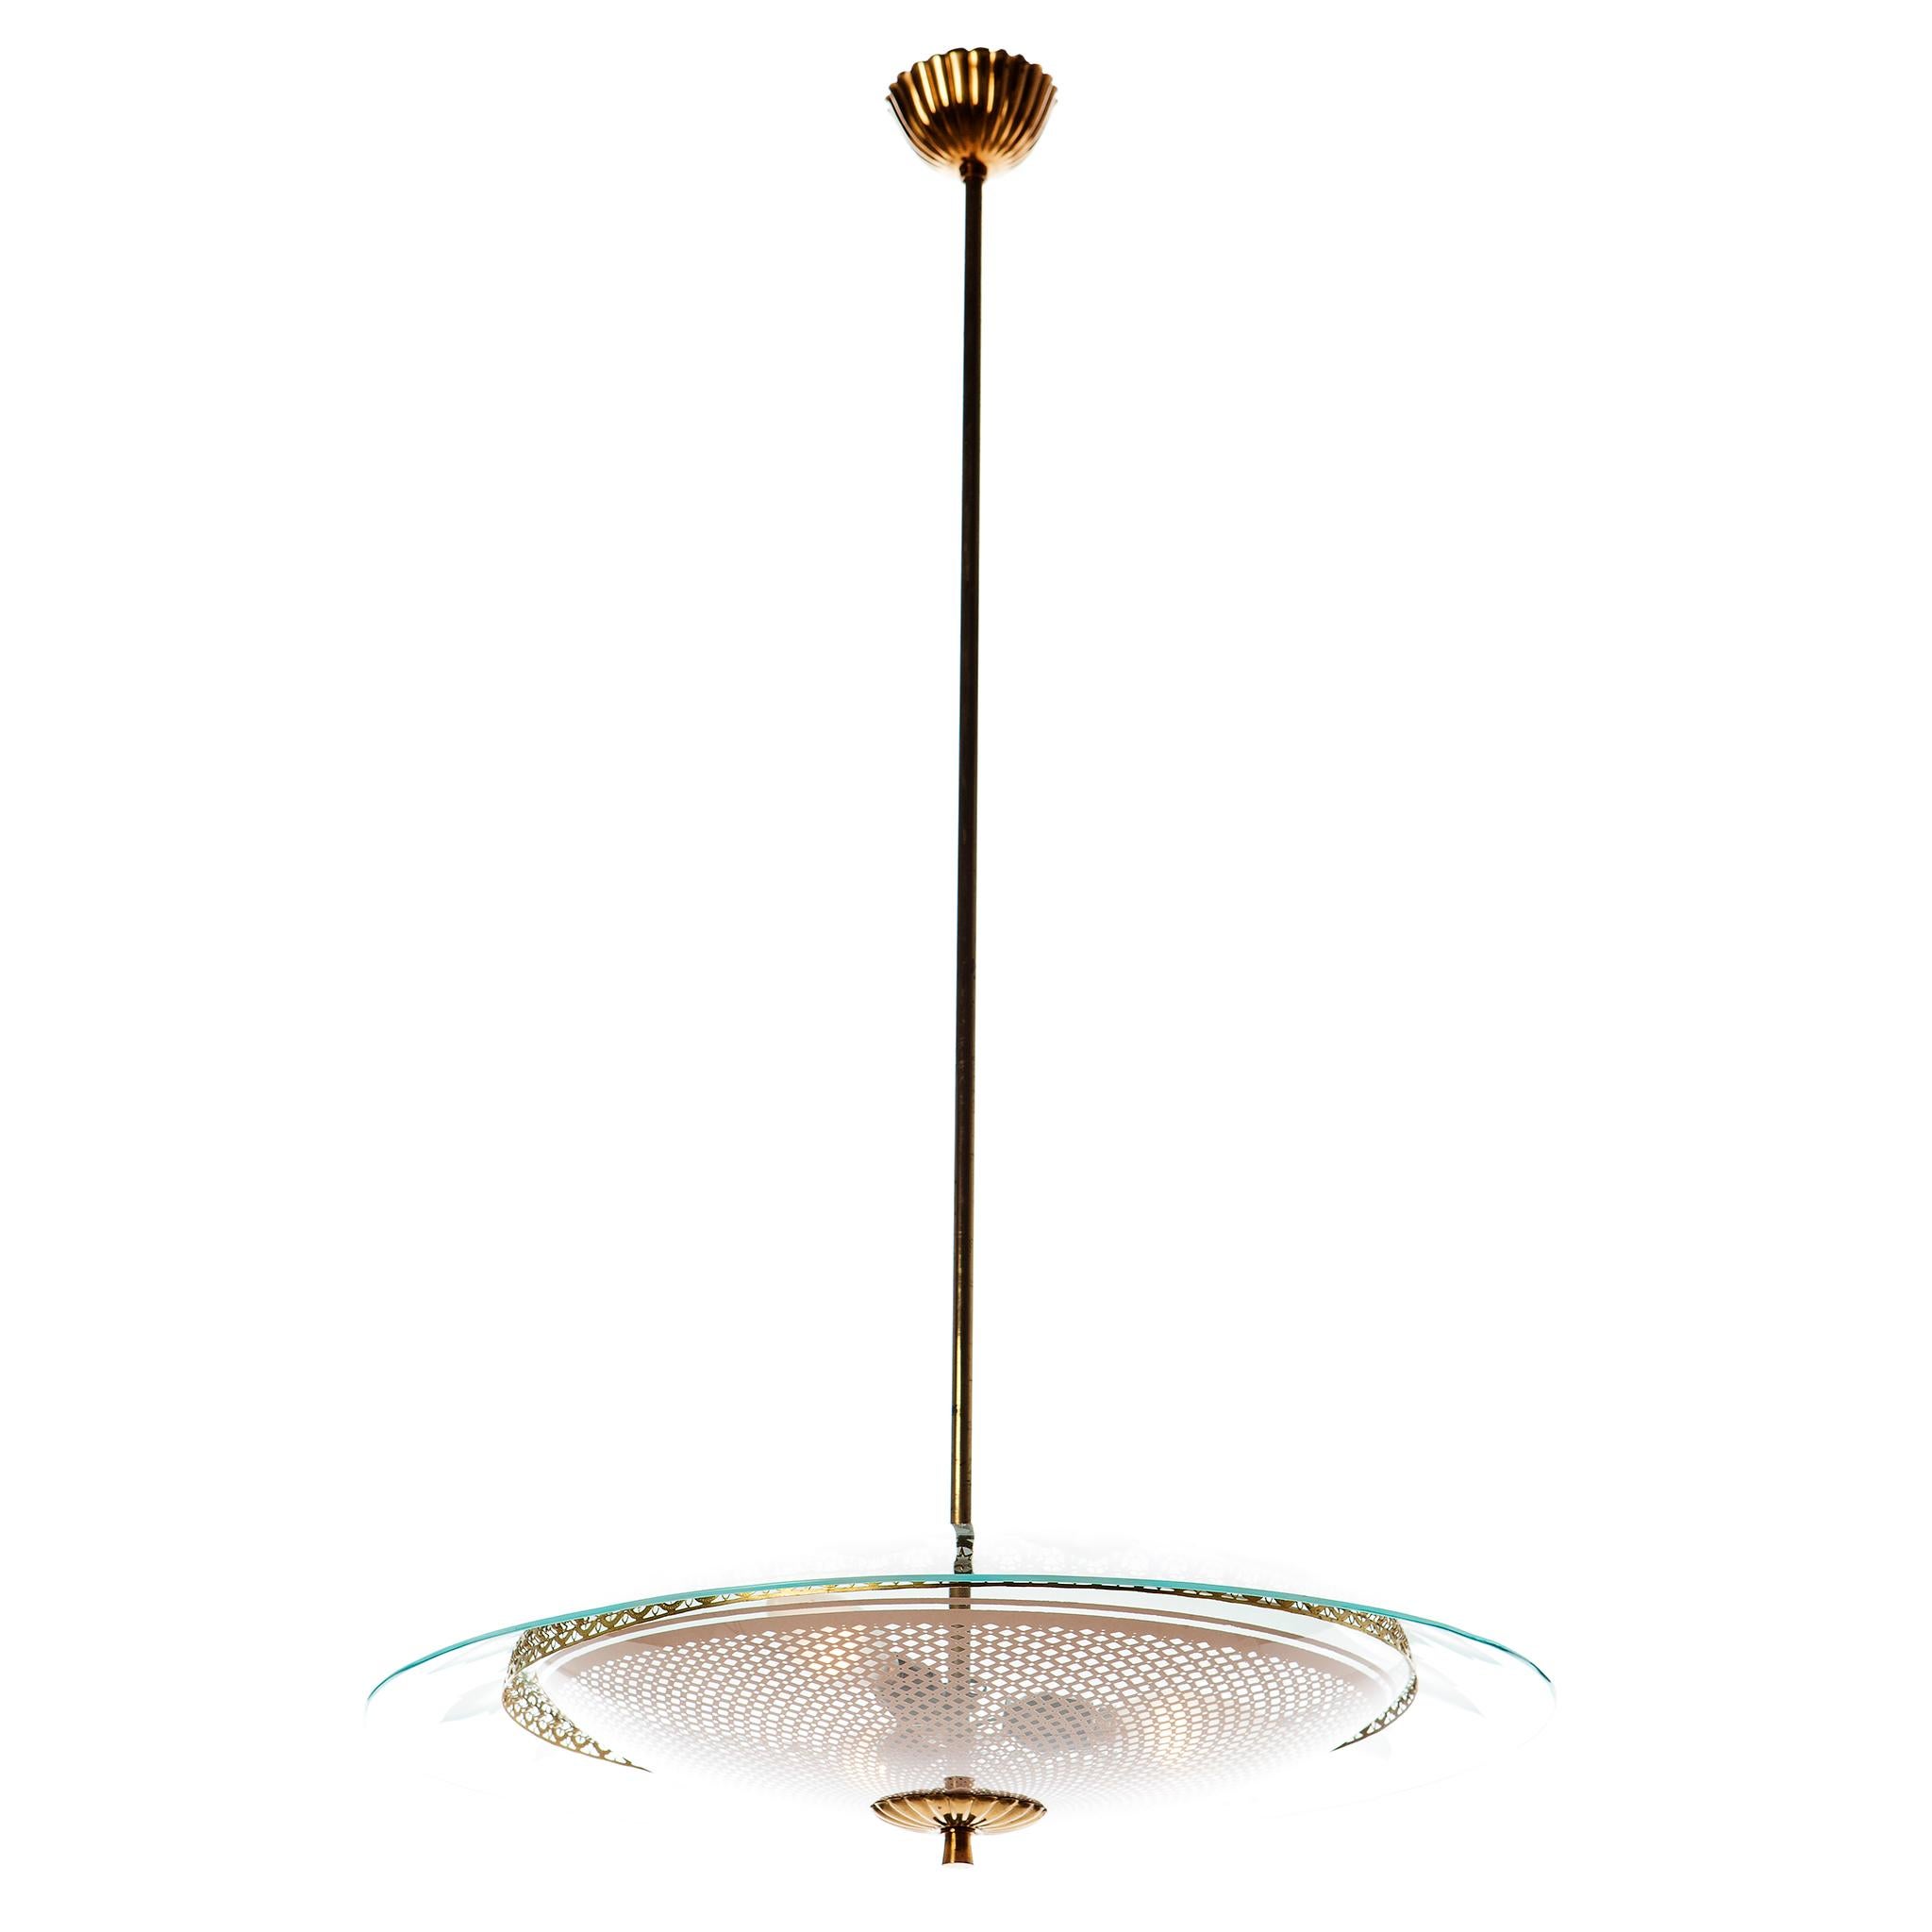 This stunning and super elegant light consisting of a brass frame and 2 unique glass reflector/saucers. 
The lower round curved glass reflector with pinkish grit motif mounts below a large round etched with flowers, clear glass reflector. To hide